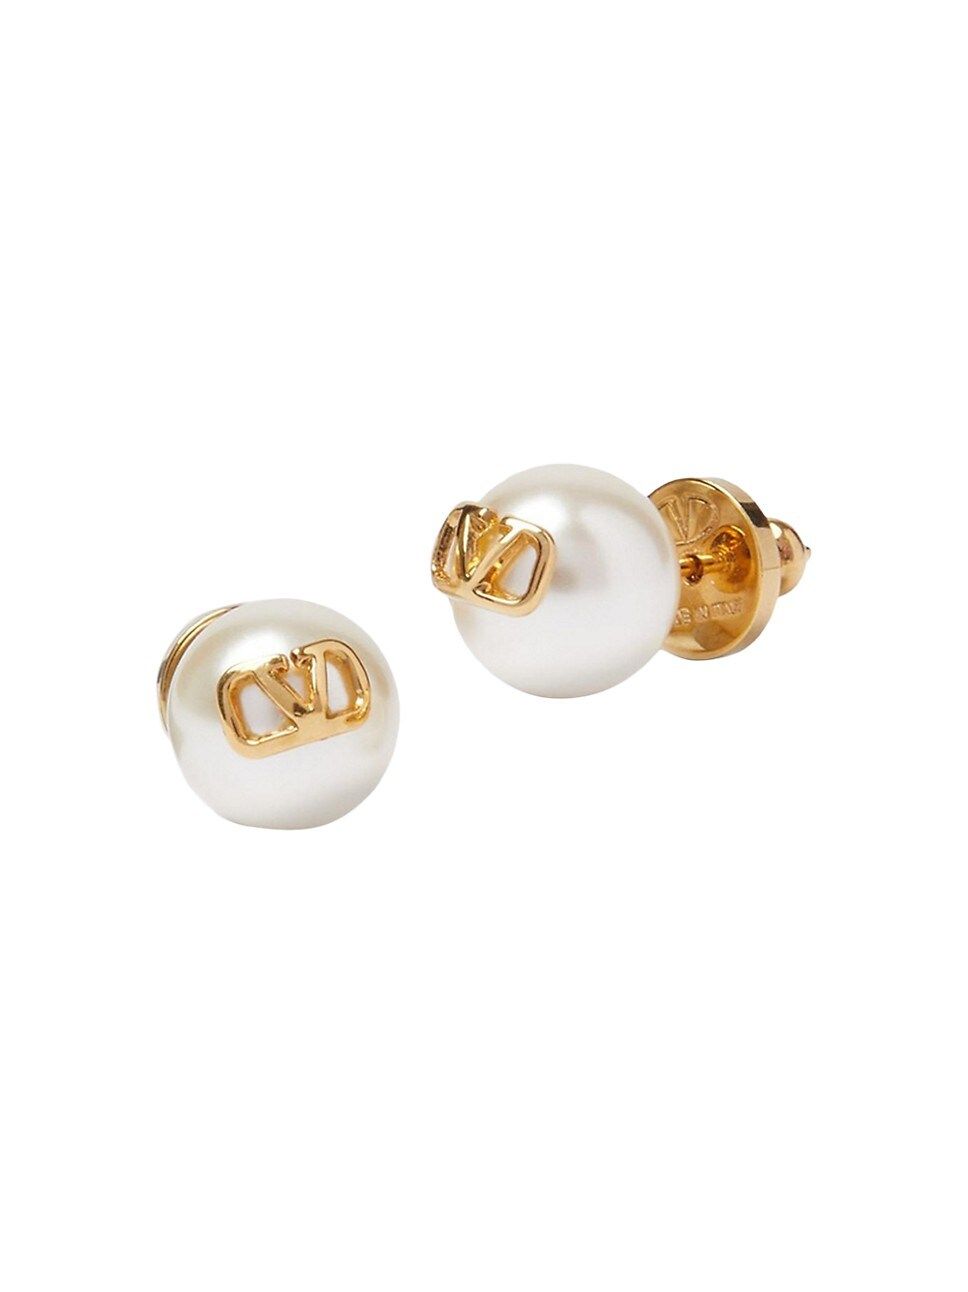 Vlogo Signature Earrings With Pearls | Saks Fifth Avenue